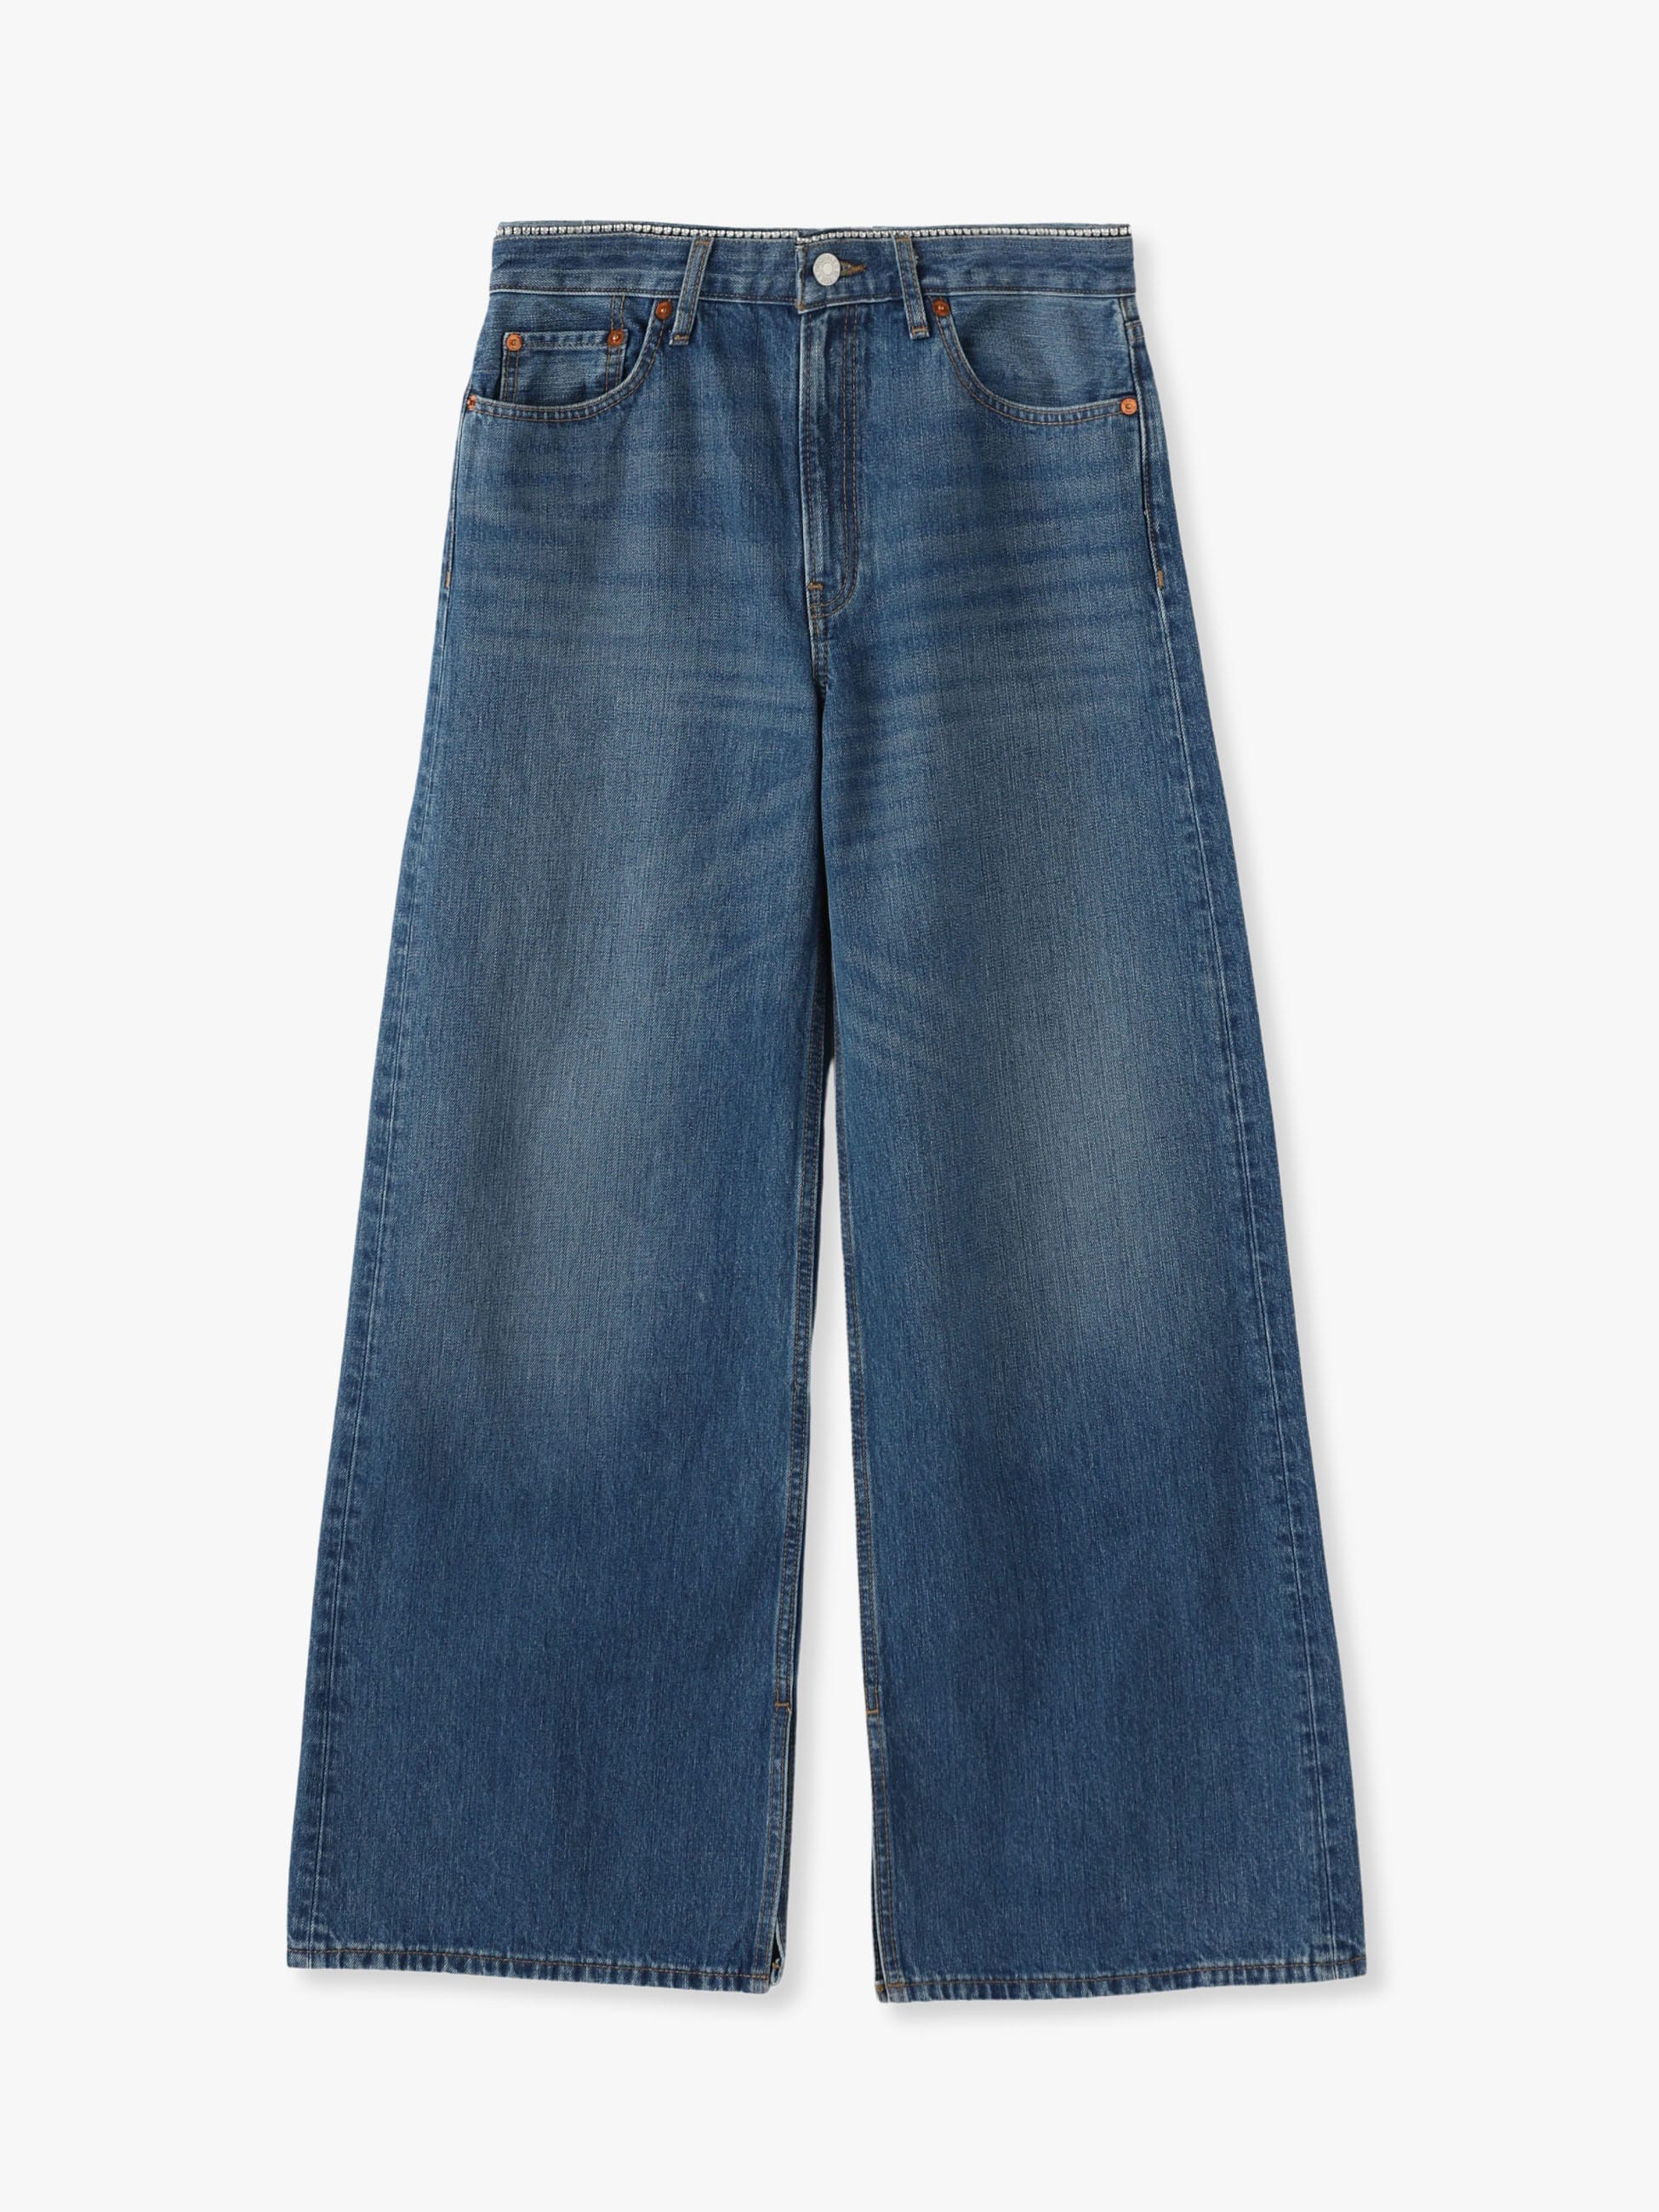 re/done Levi’s mid rise cropped サイズ24